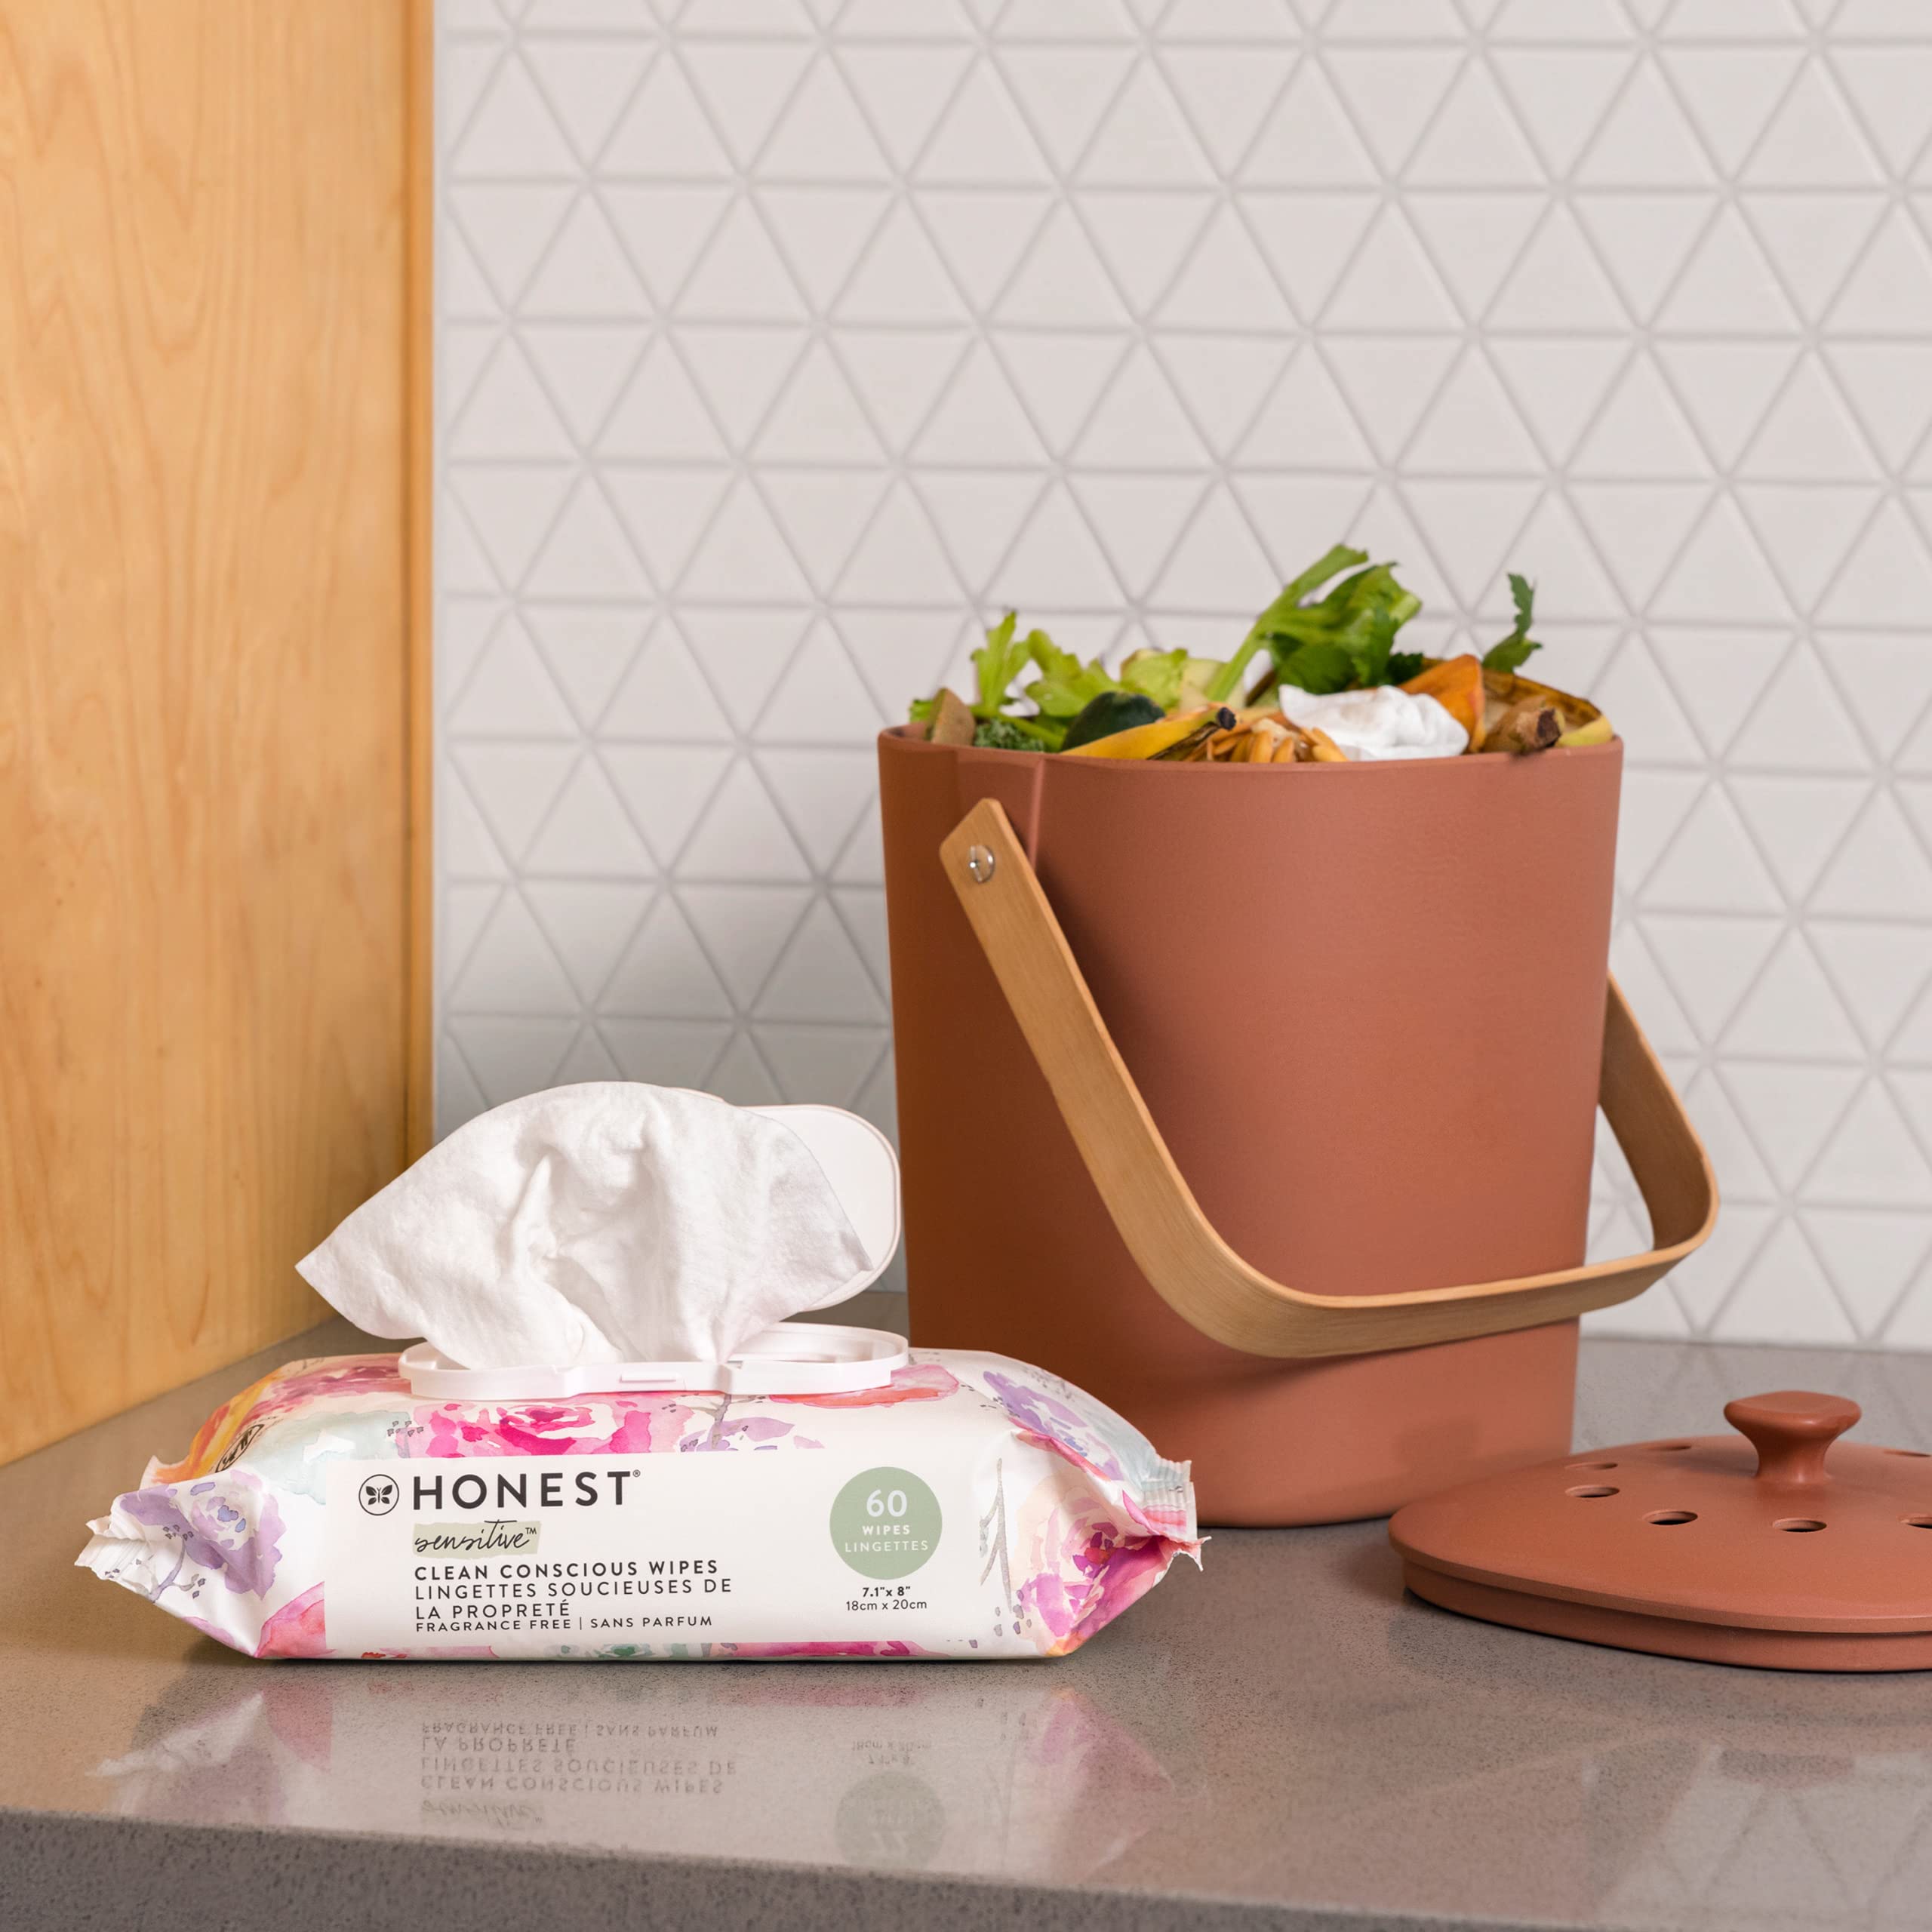 The Honest Company Clean Conscious Wipes | 99% Water, Compostable, Plant-Based, Baby Wipes | Hypoallergenic, EWG Verified | Rose Blossom, 60 Count